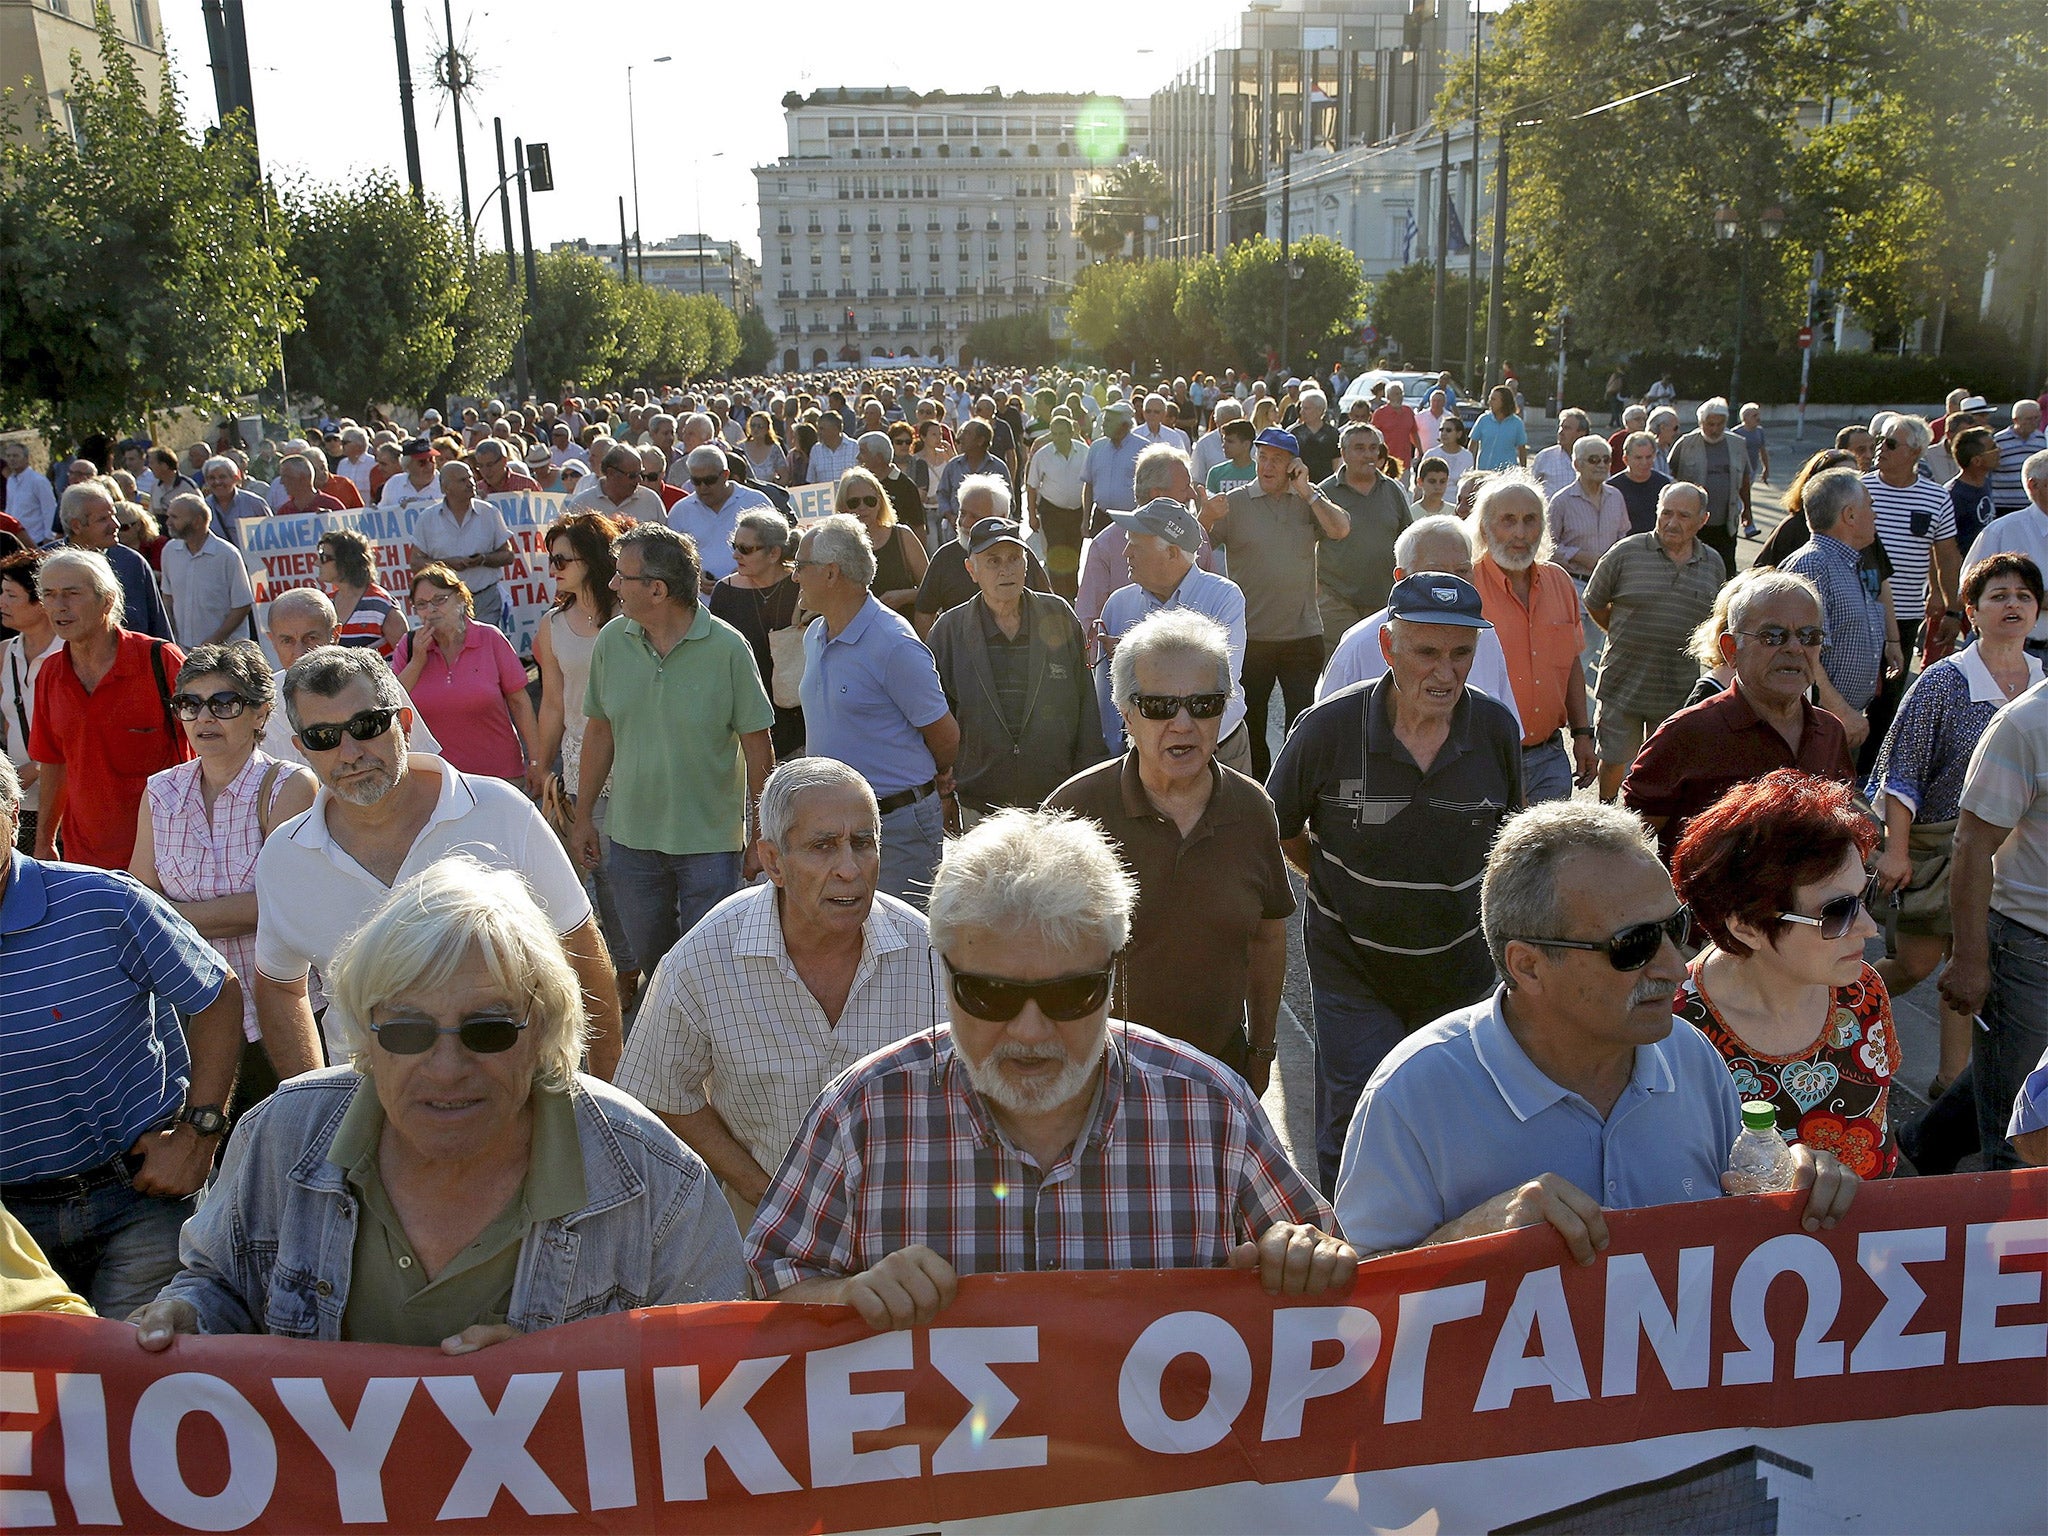 An anti-austerity demo in Athens on Tuesday